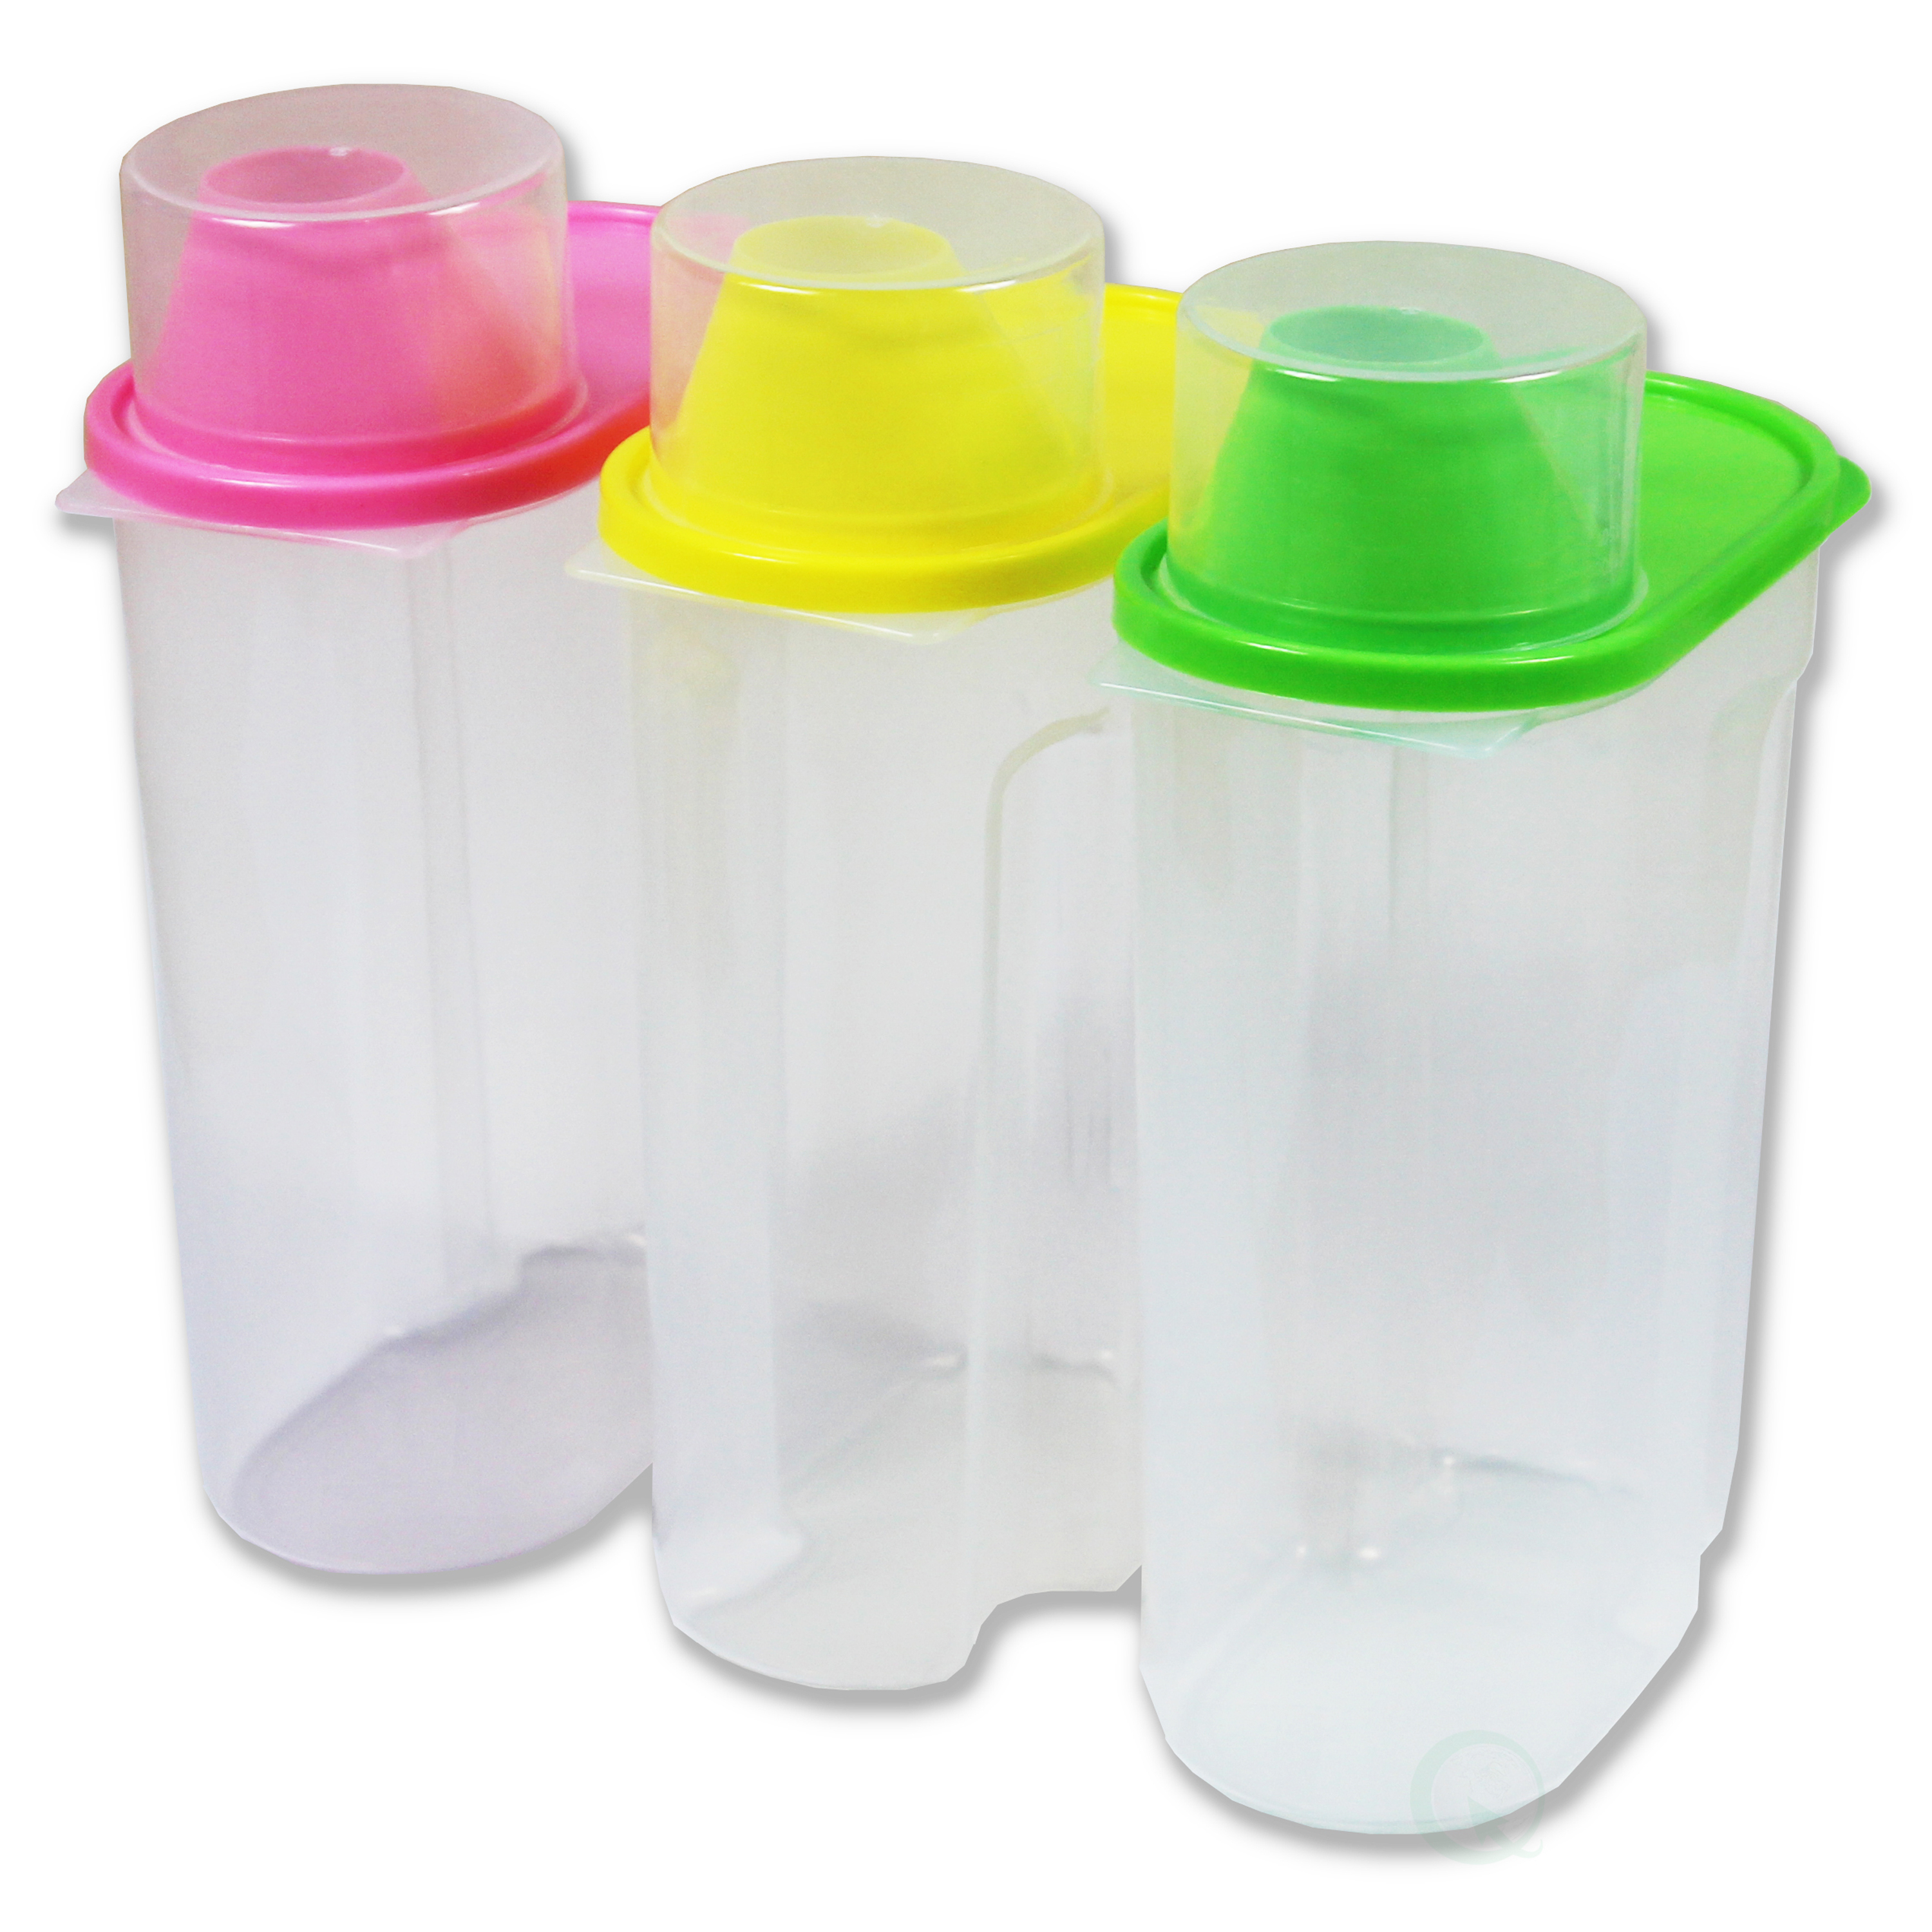 BPA-Free Plastic Food Saver-Kitchen Food Cereal Storage Containers With Graduated Cap - Set Of 3 Large